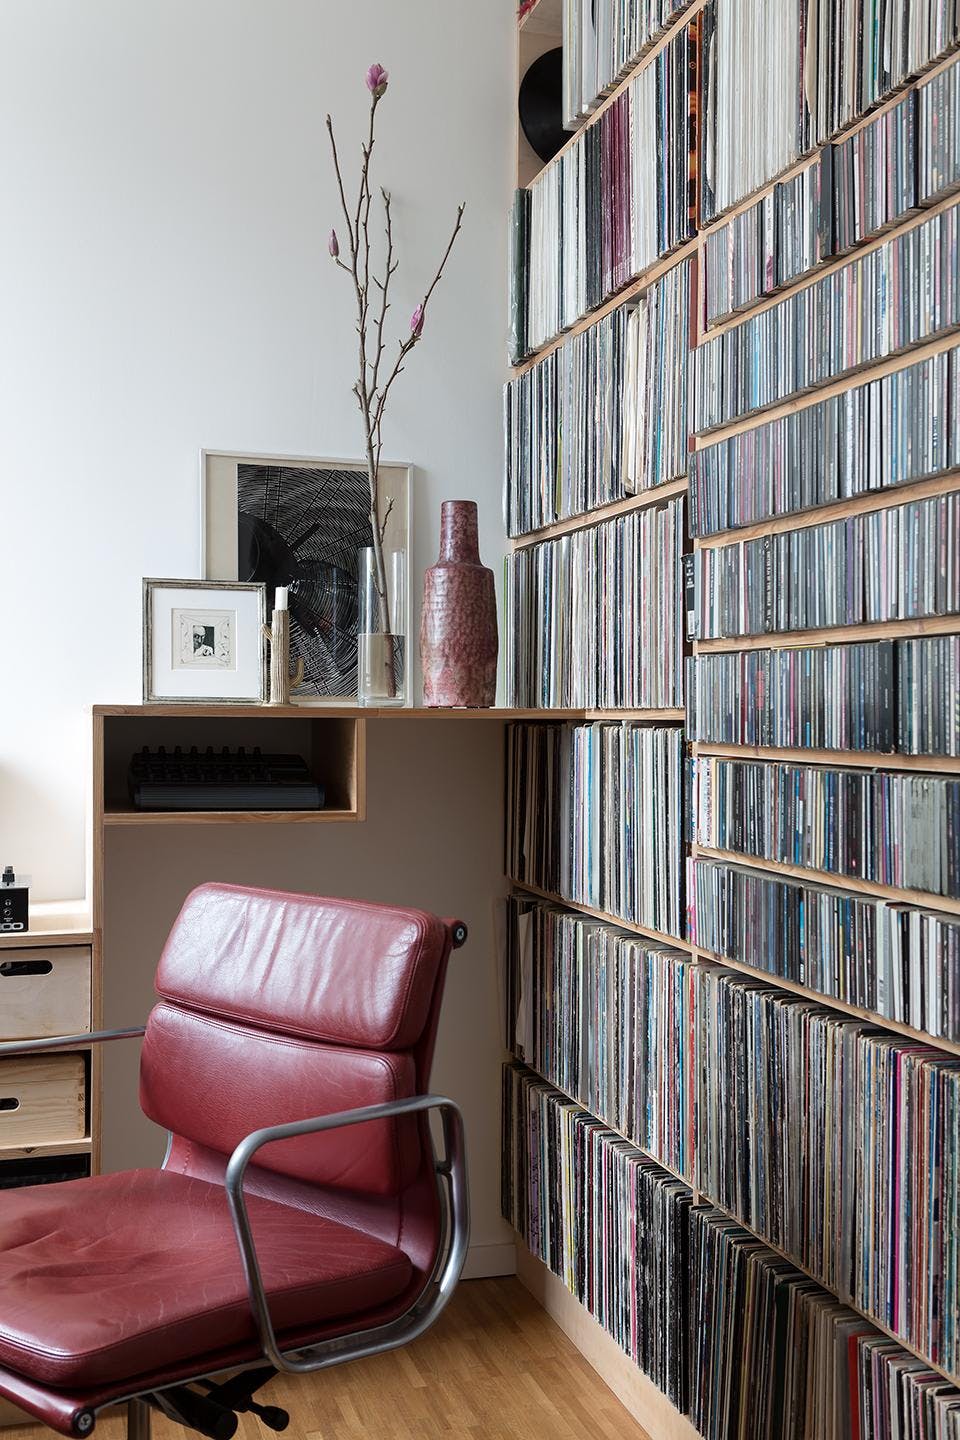 The image features a room with a red leather chair placed in the corner. The chair is situated next to a bookshelf filled with numerous CDs and DVDs. The bookshelf is located on the left side of the room, and the CDs and DVDs are neatly arranged on the shelves.

In addition to the chair and bookshelf, there is a potted plant placed on the right side of the room, adding a touch of greenery to the space. A vase can also be seen on the left side of the room, further enhancing the room's decor.